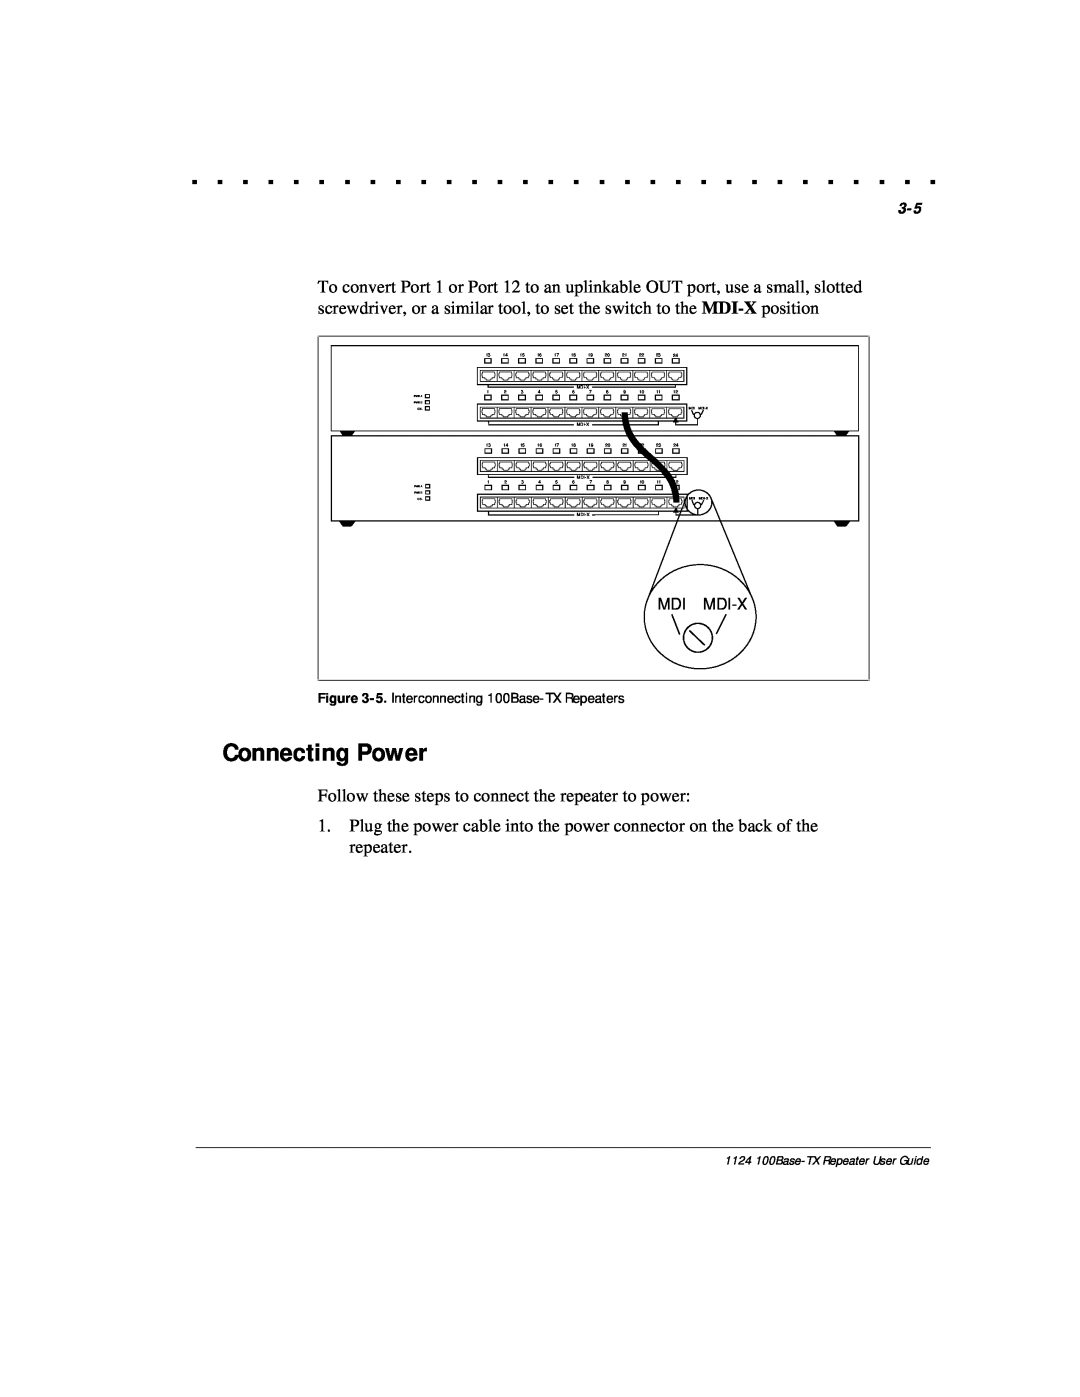 Compaq 1124 manual Connecting Power 